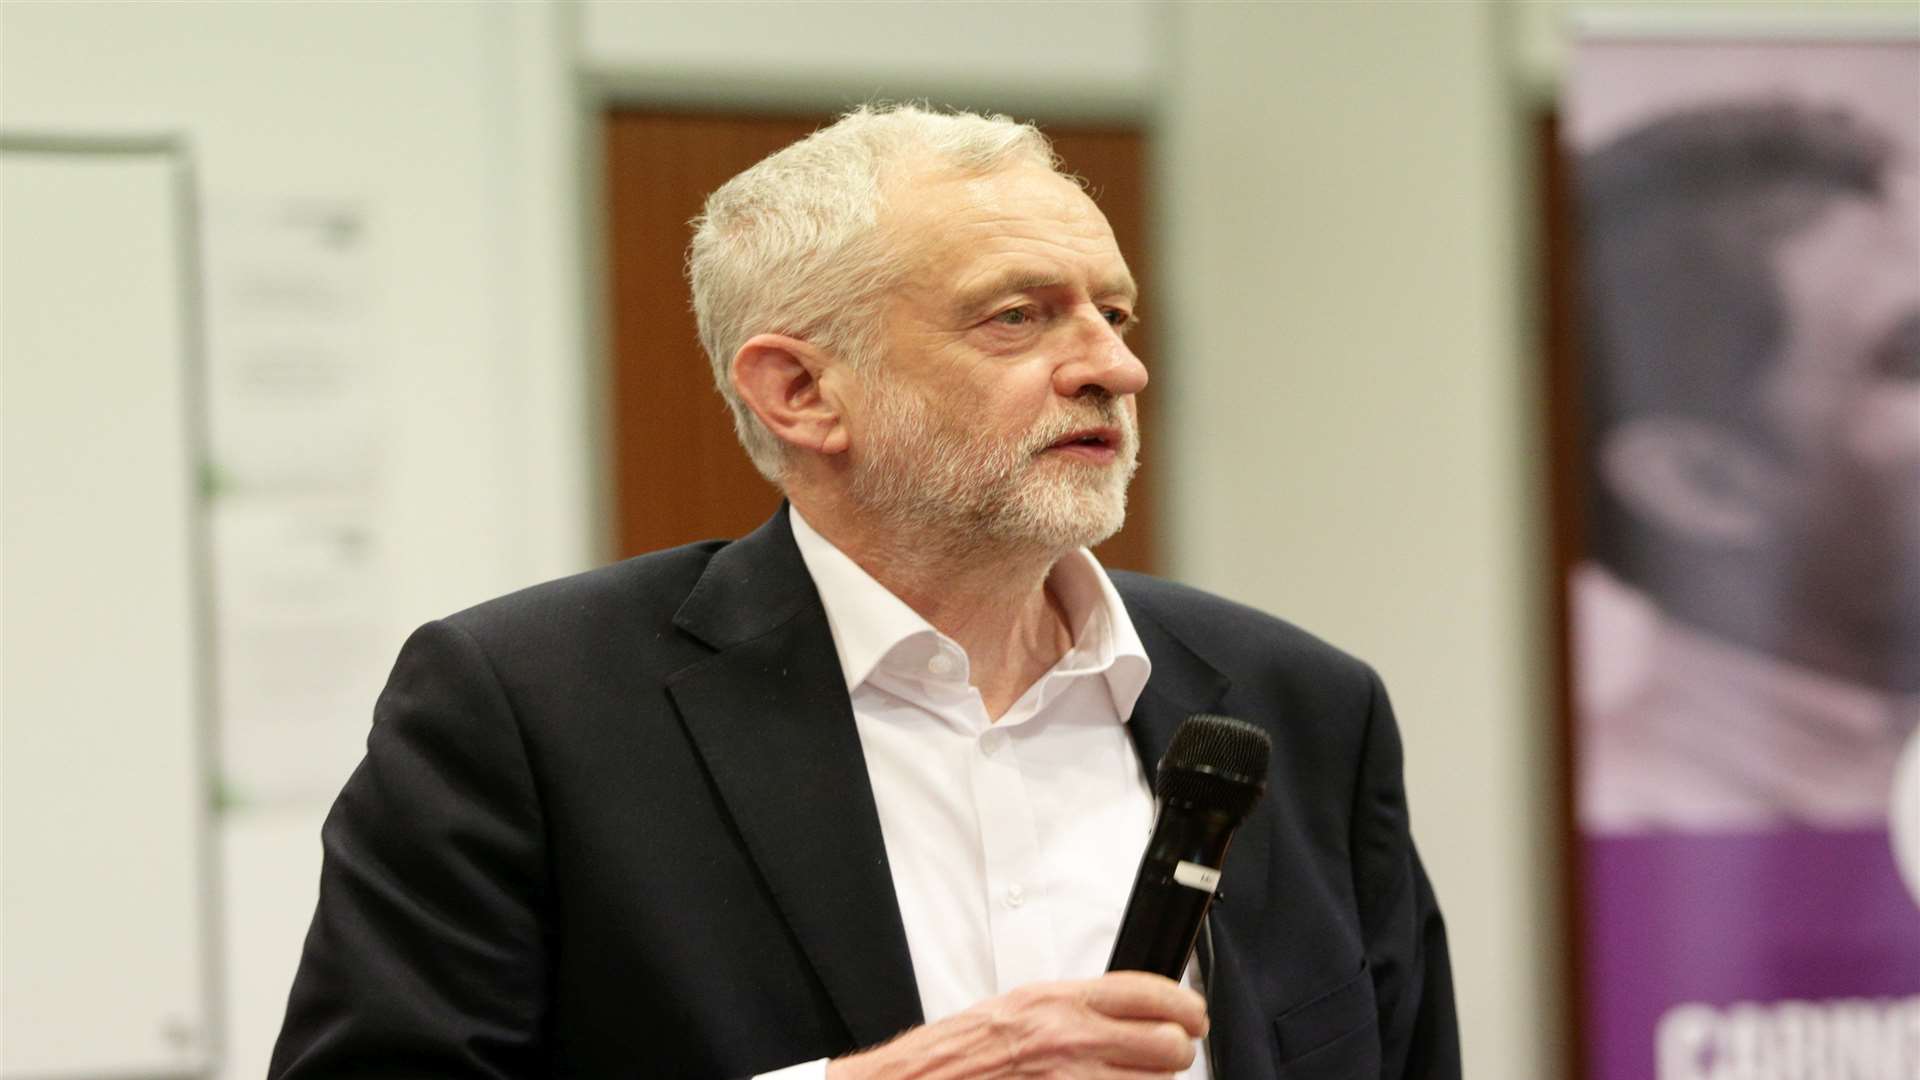 Labour leader Jeremy Corbyn sacked three front-benchers over defying party whip on EU vote.